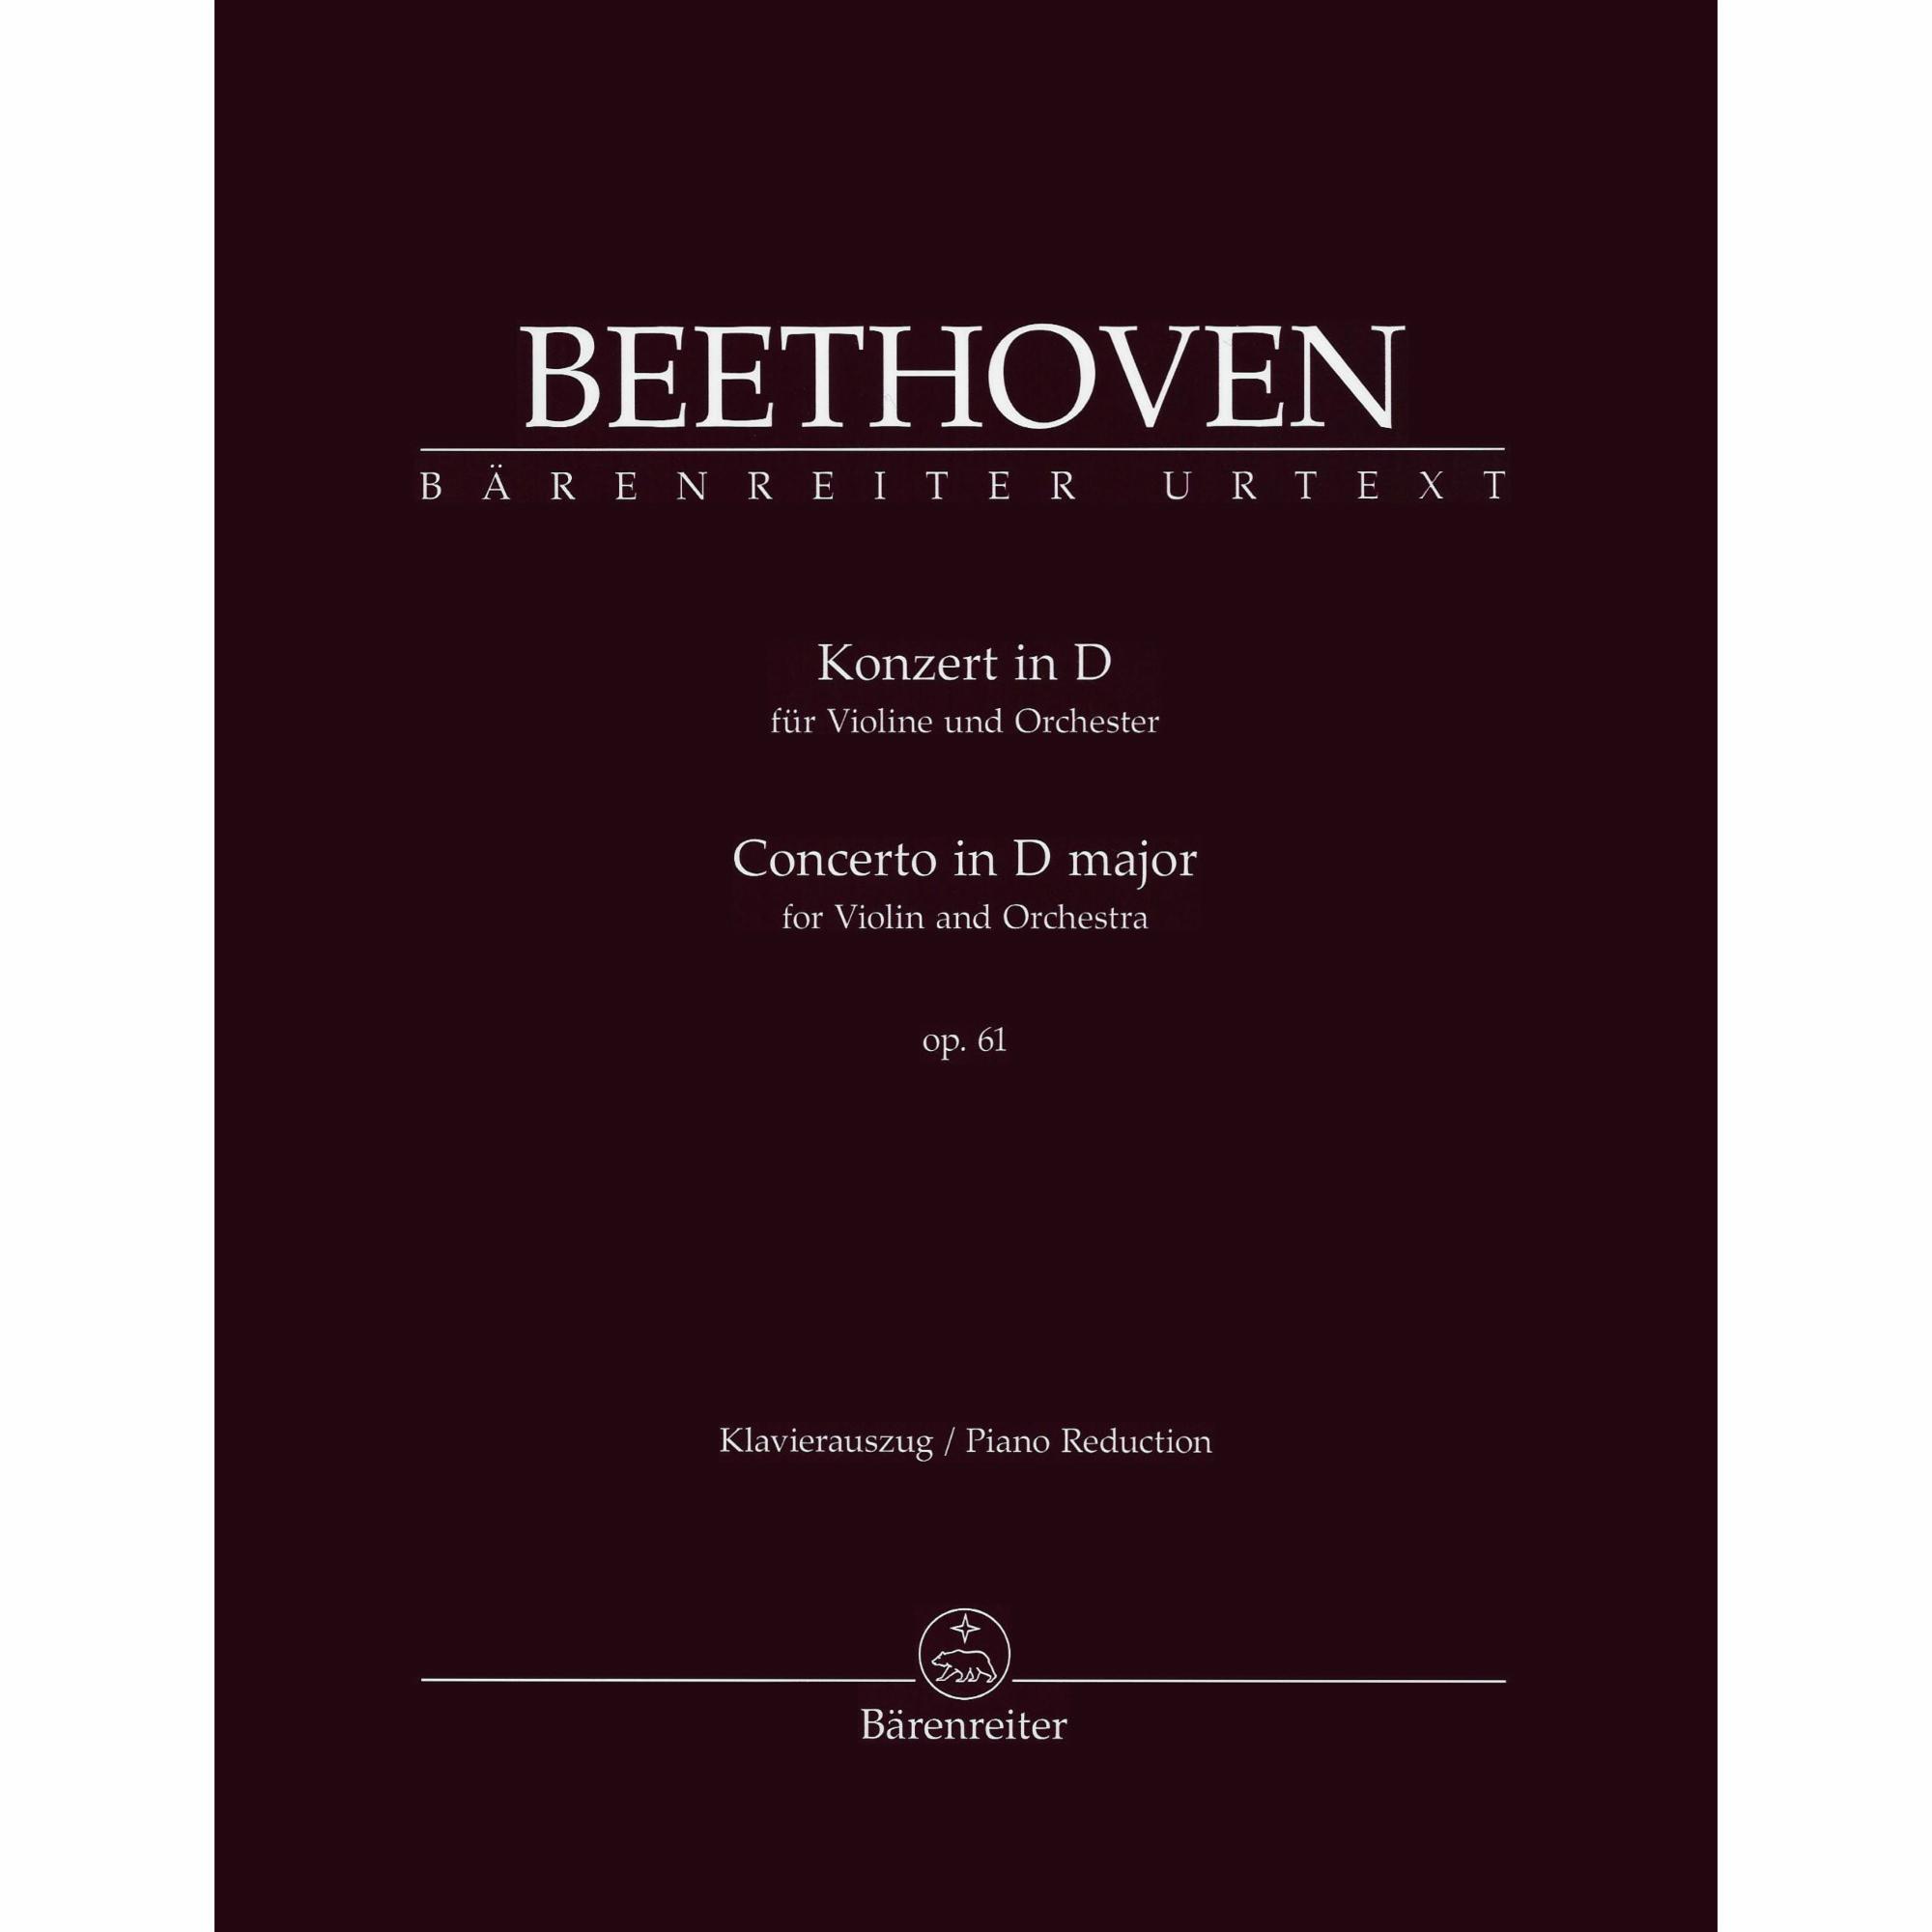 Beethoven -- Concerto in D Major, Op. 61 for Violin and Piano